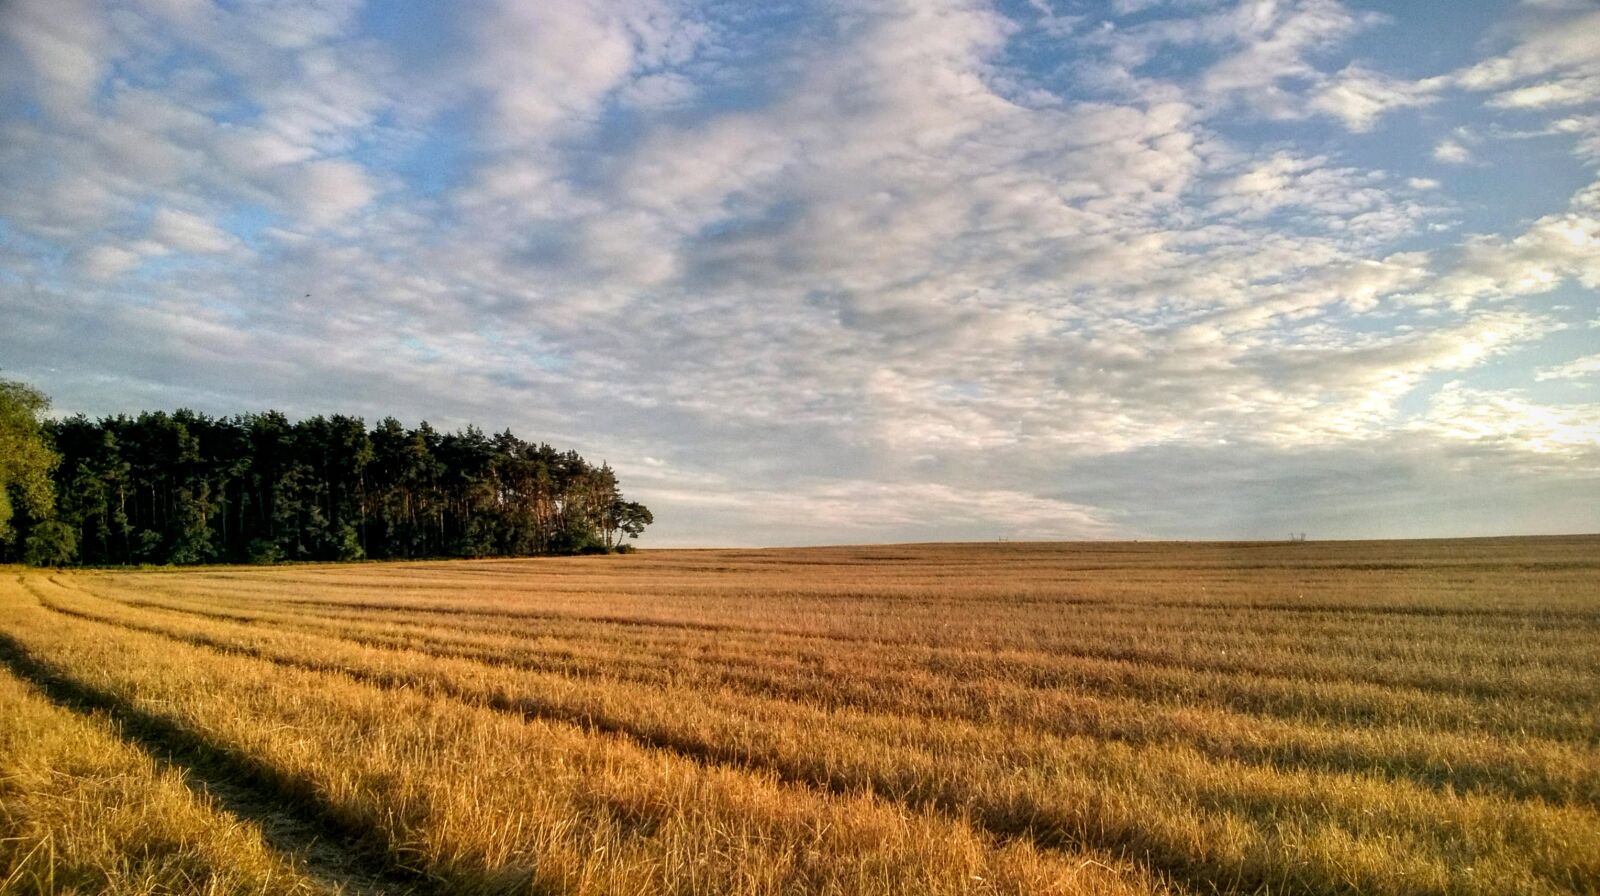 Nokia Lumia 735 sample photo. Agriculture, cereal, clouds, countryside photography